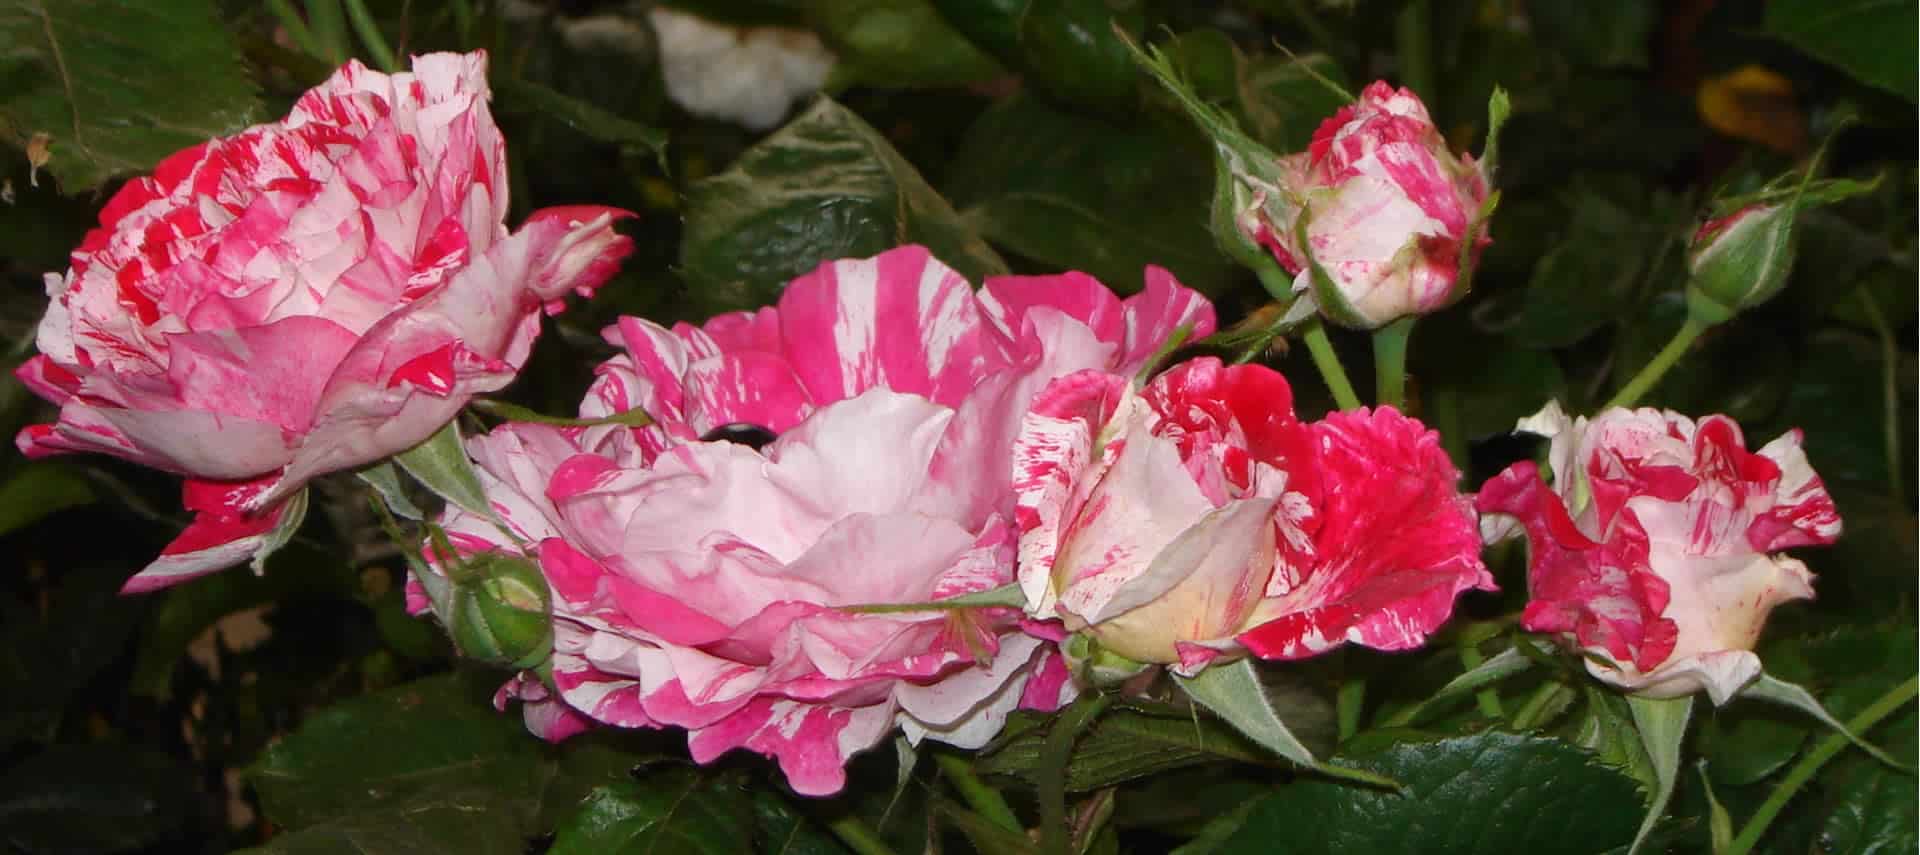 Beautiful pink and white striped roses surrounded by green leaves.